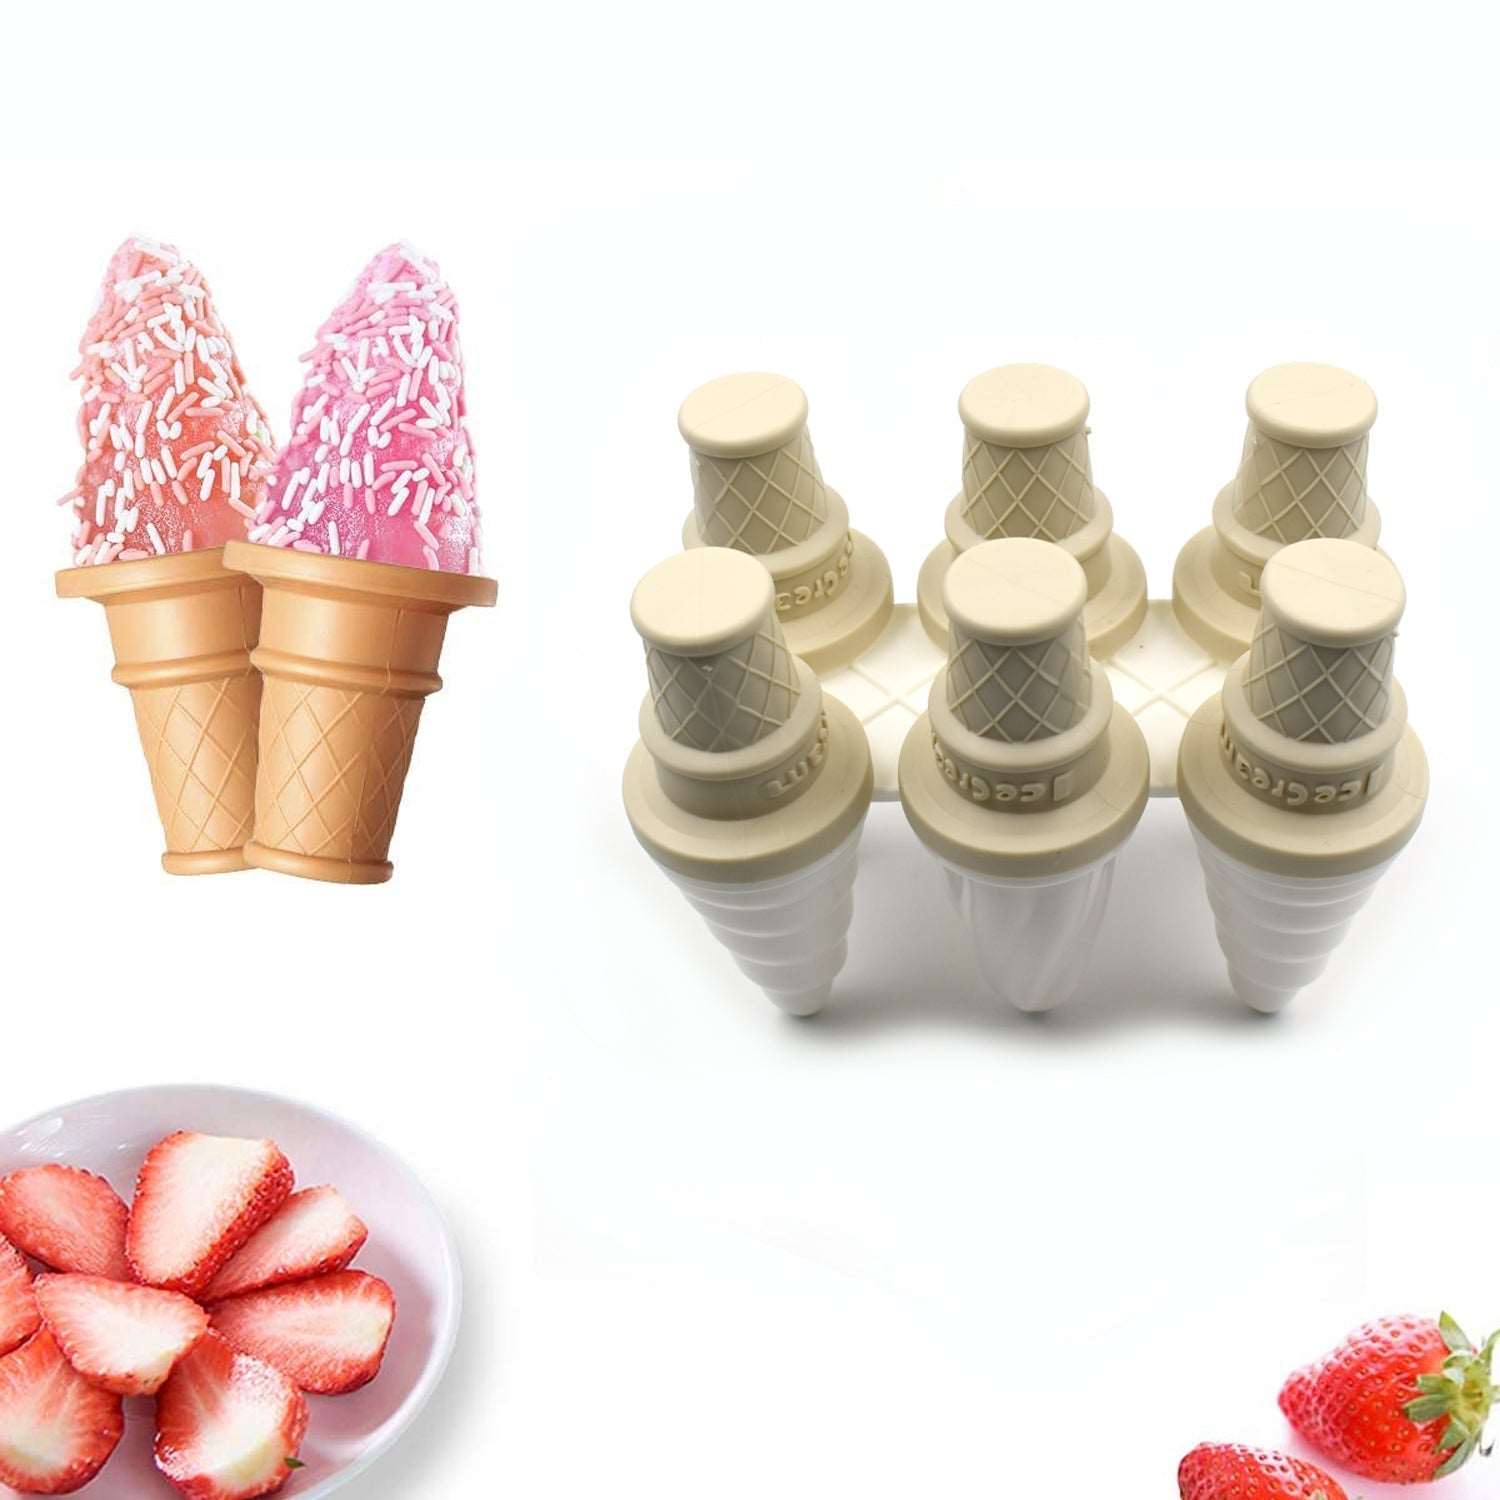 6 Pc Ice Cream Mold used for making ice-creams in restaurants and ice-cream parlours